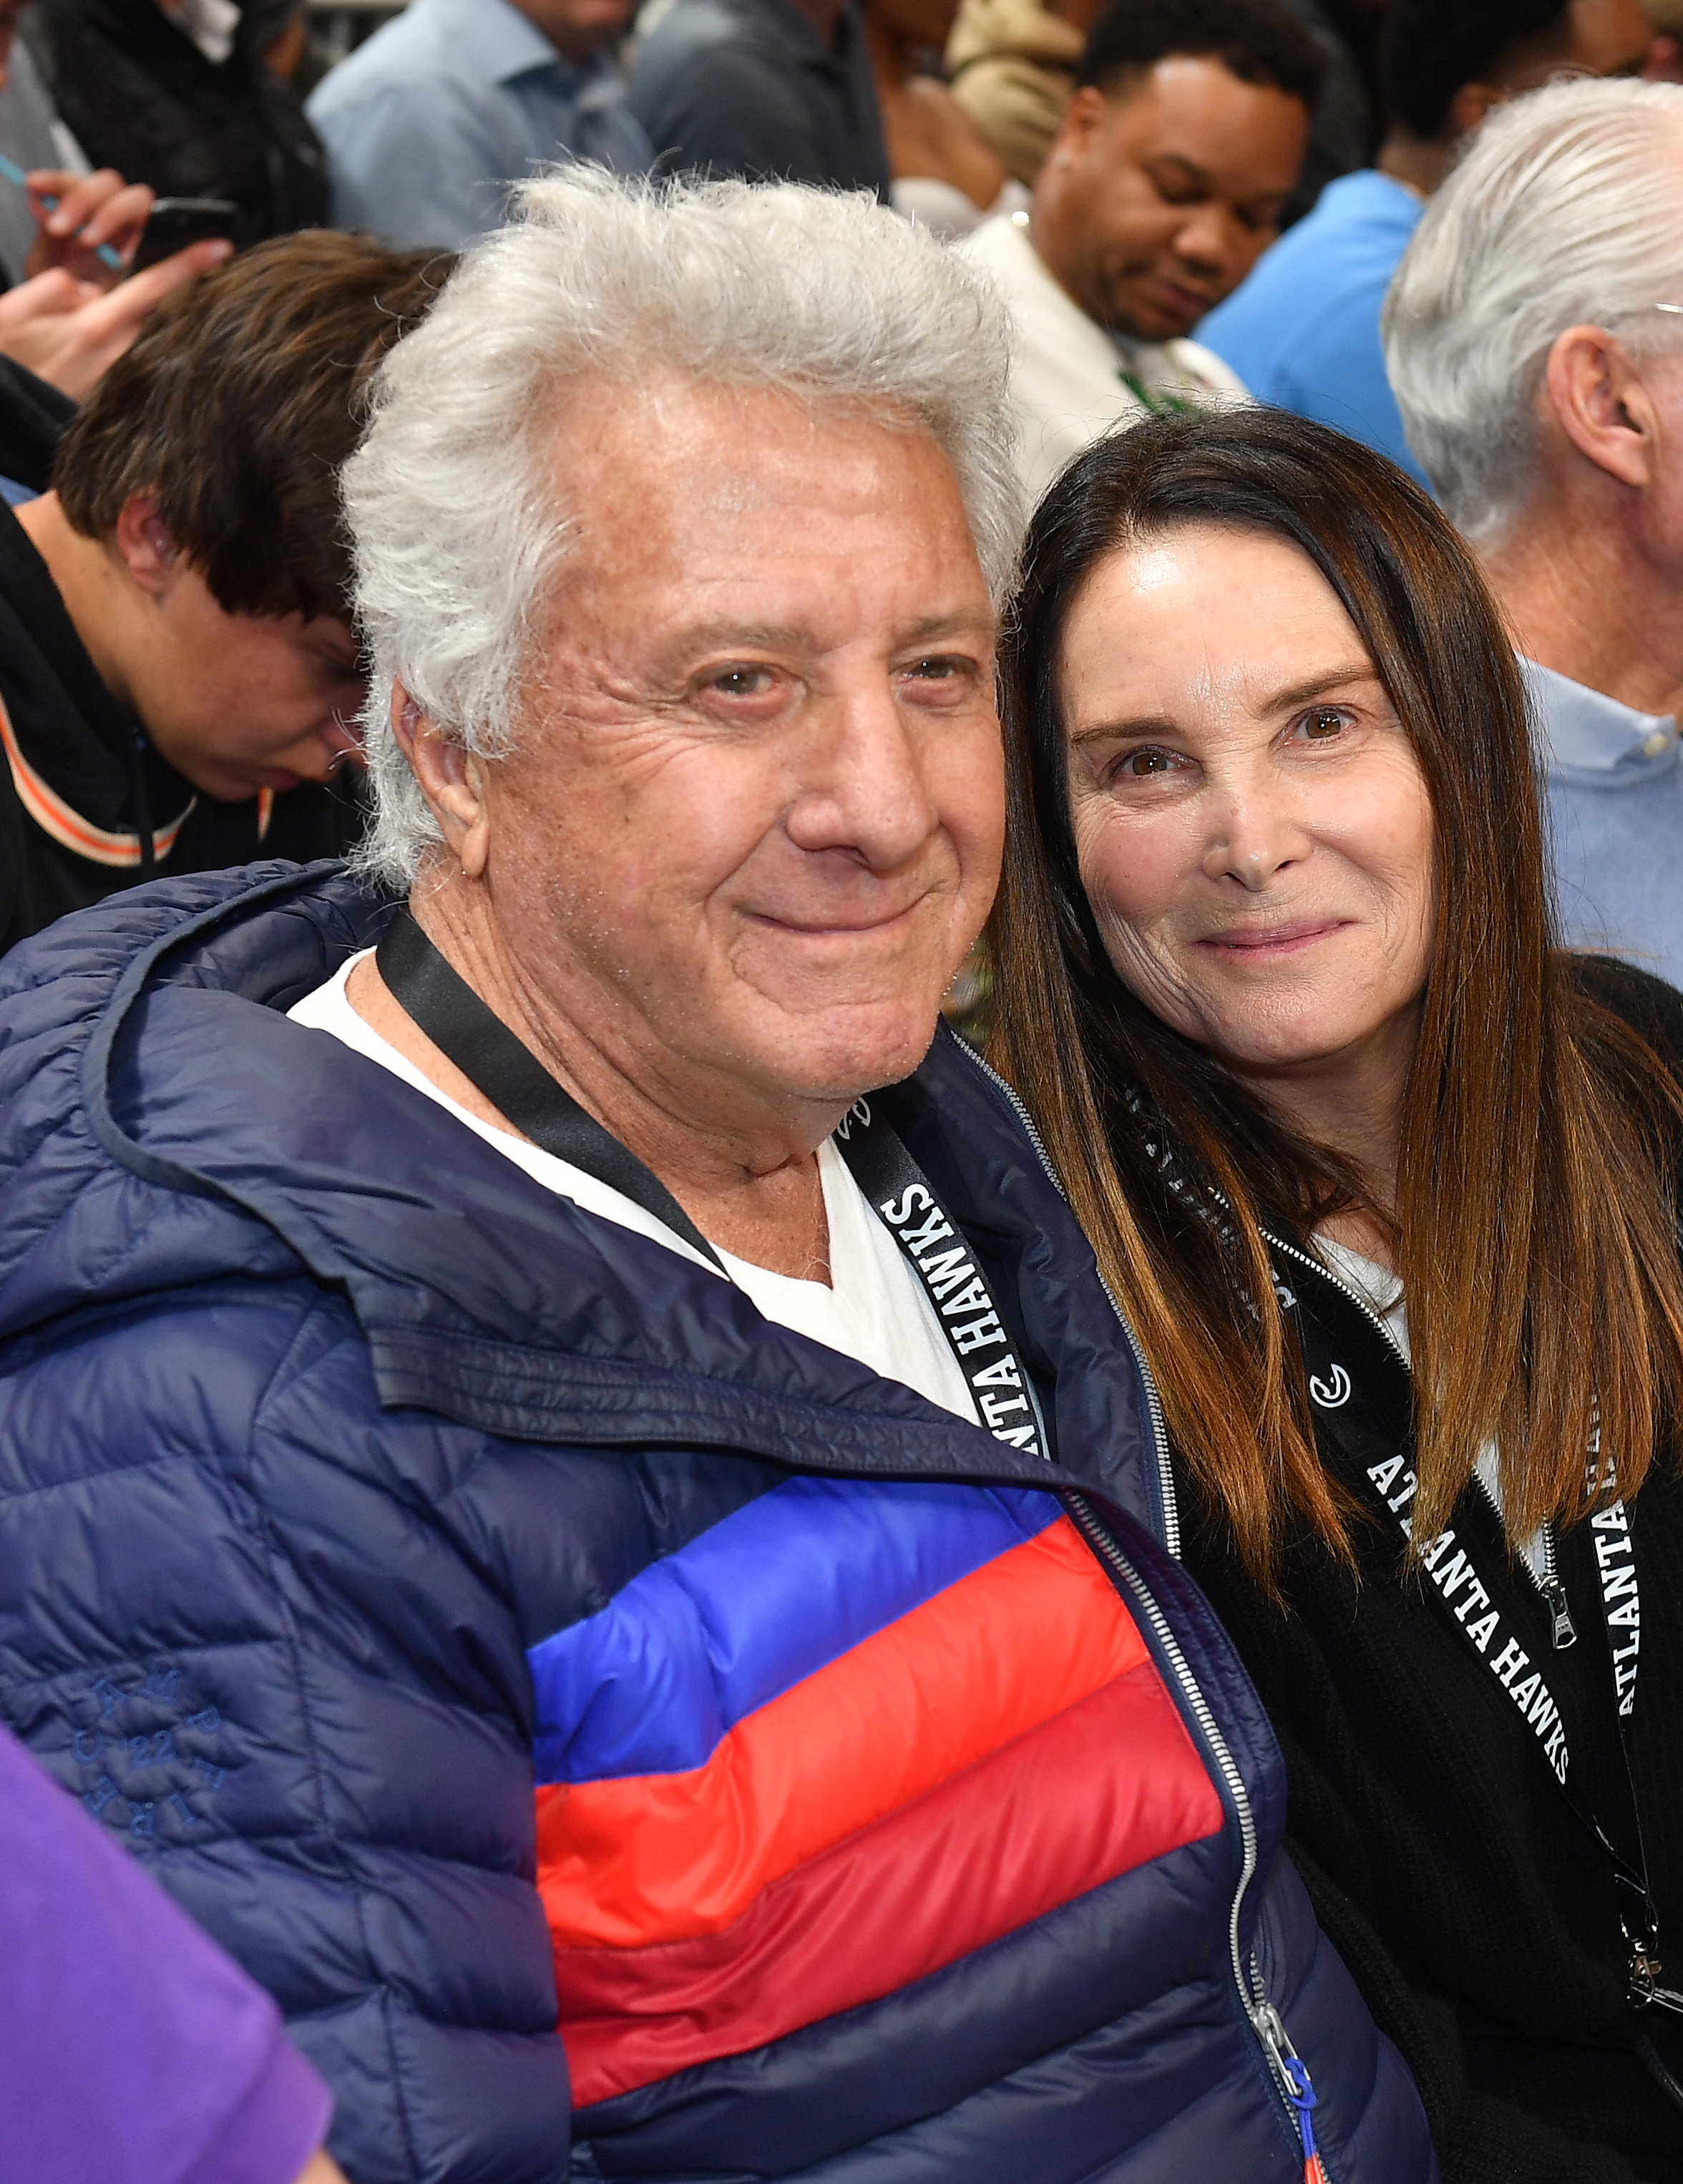 Dustin Hoffman and Lisa Hoffman at the game between the New York Knicks and the Atlanta Hawks in Atlanta, Georgia on February 15, 2023. | Source: Getty Images